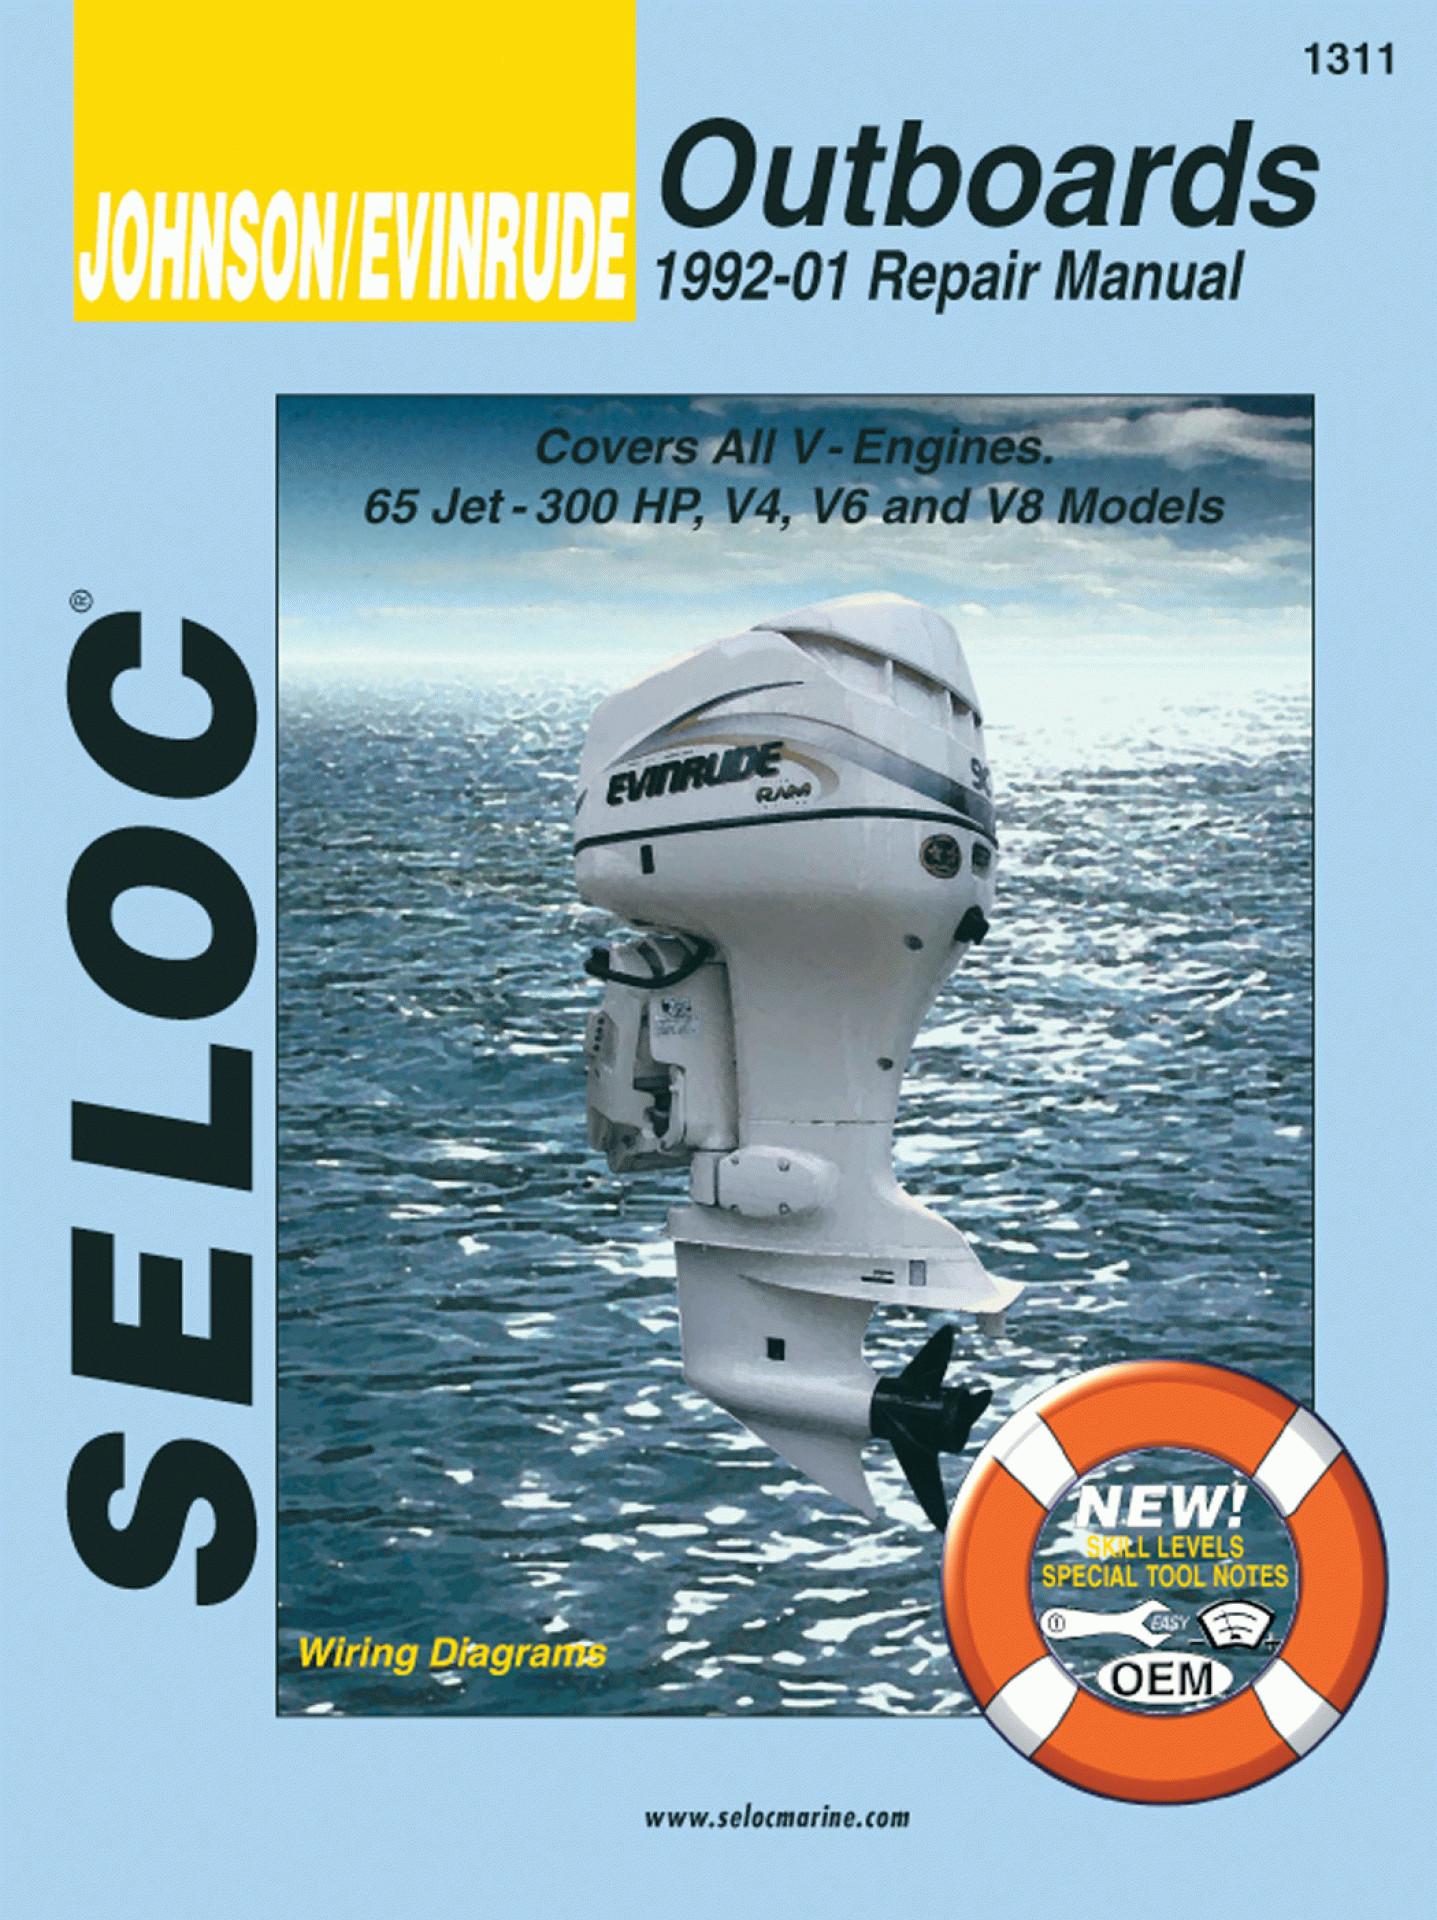 SELOC PUBLISHING | 18-01311 | REPAIR MANUAL Johnson/Evinrude Outboards 4 6 & 8 Cyl.1992-01